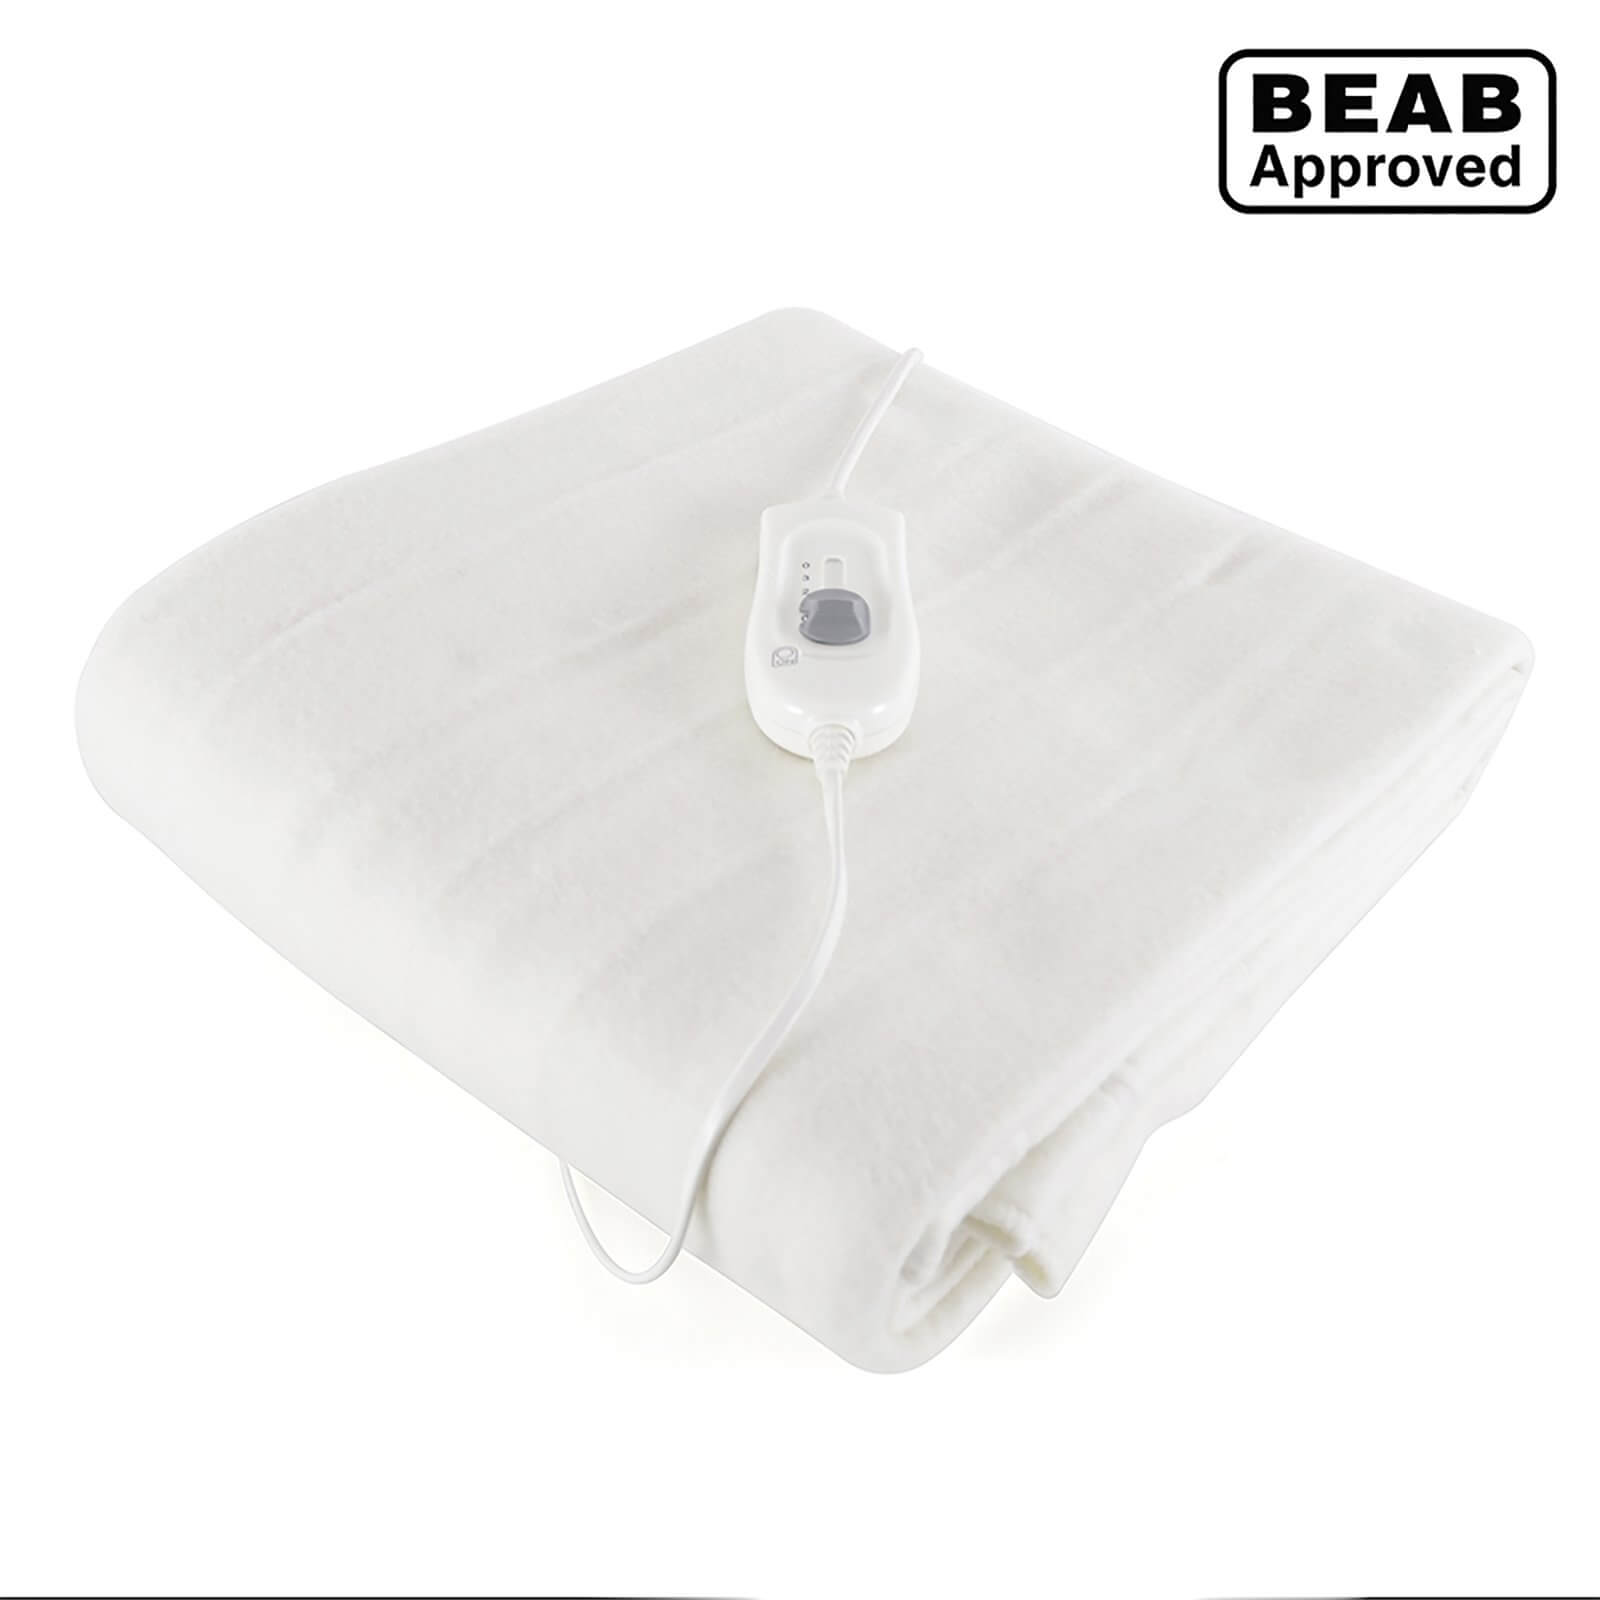 StayWarm Superior Electric Blanket - Single (BEAB Approved)